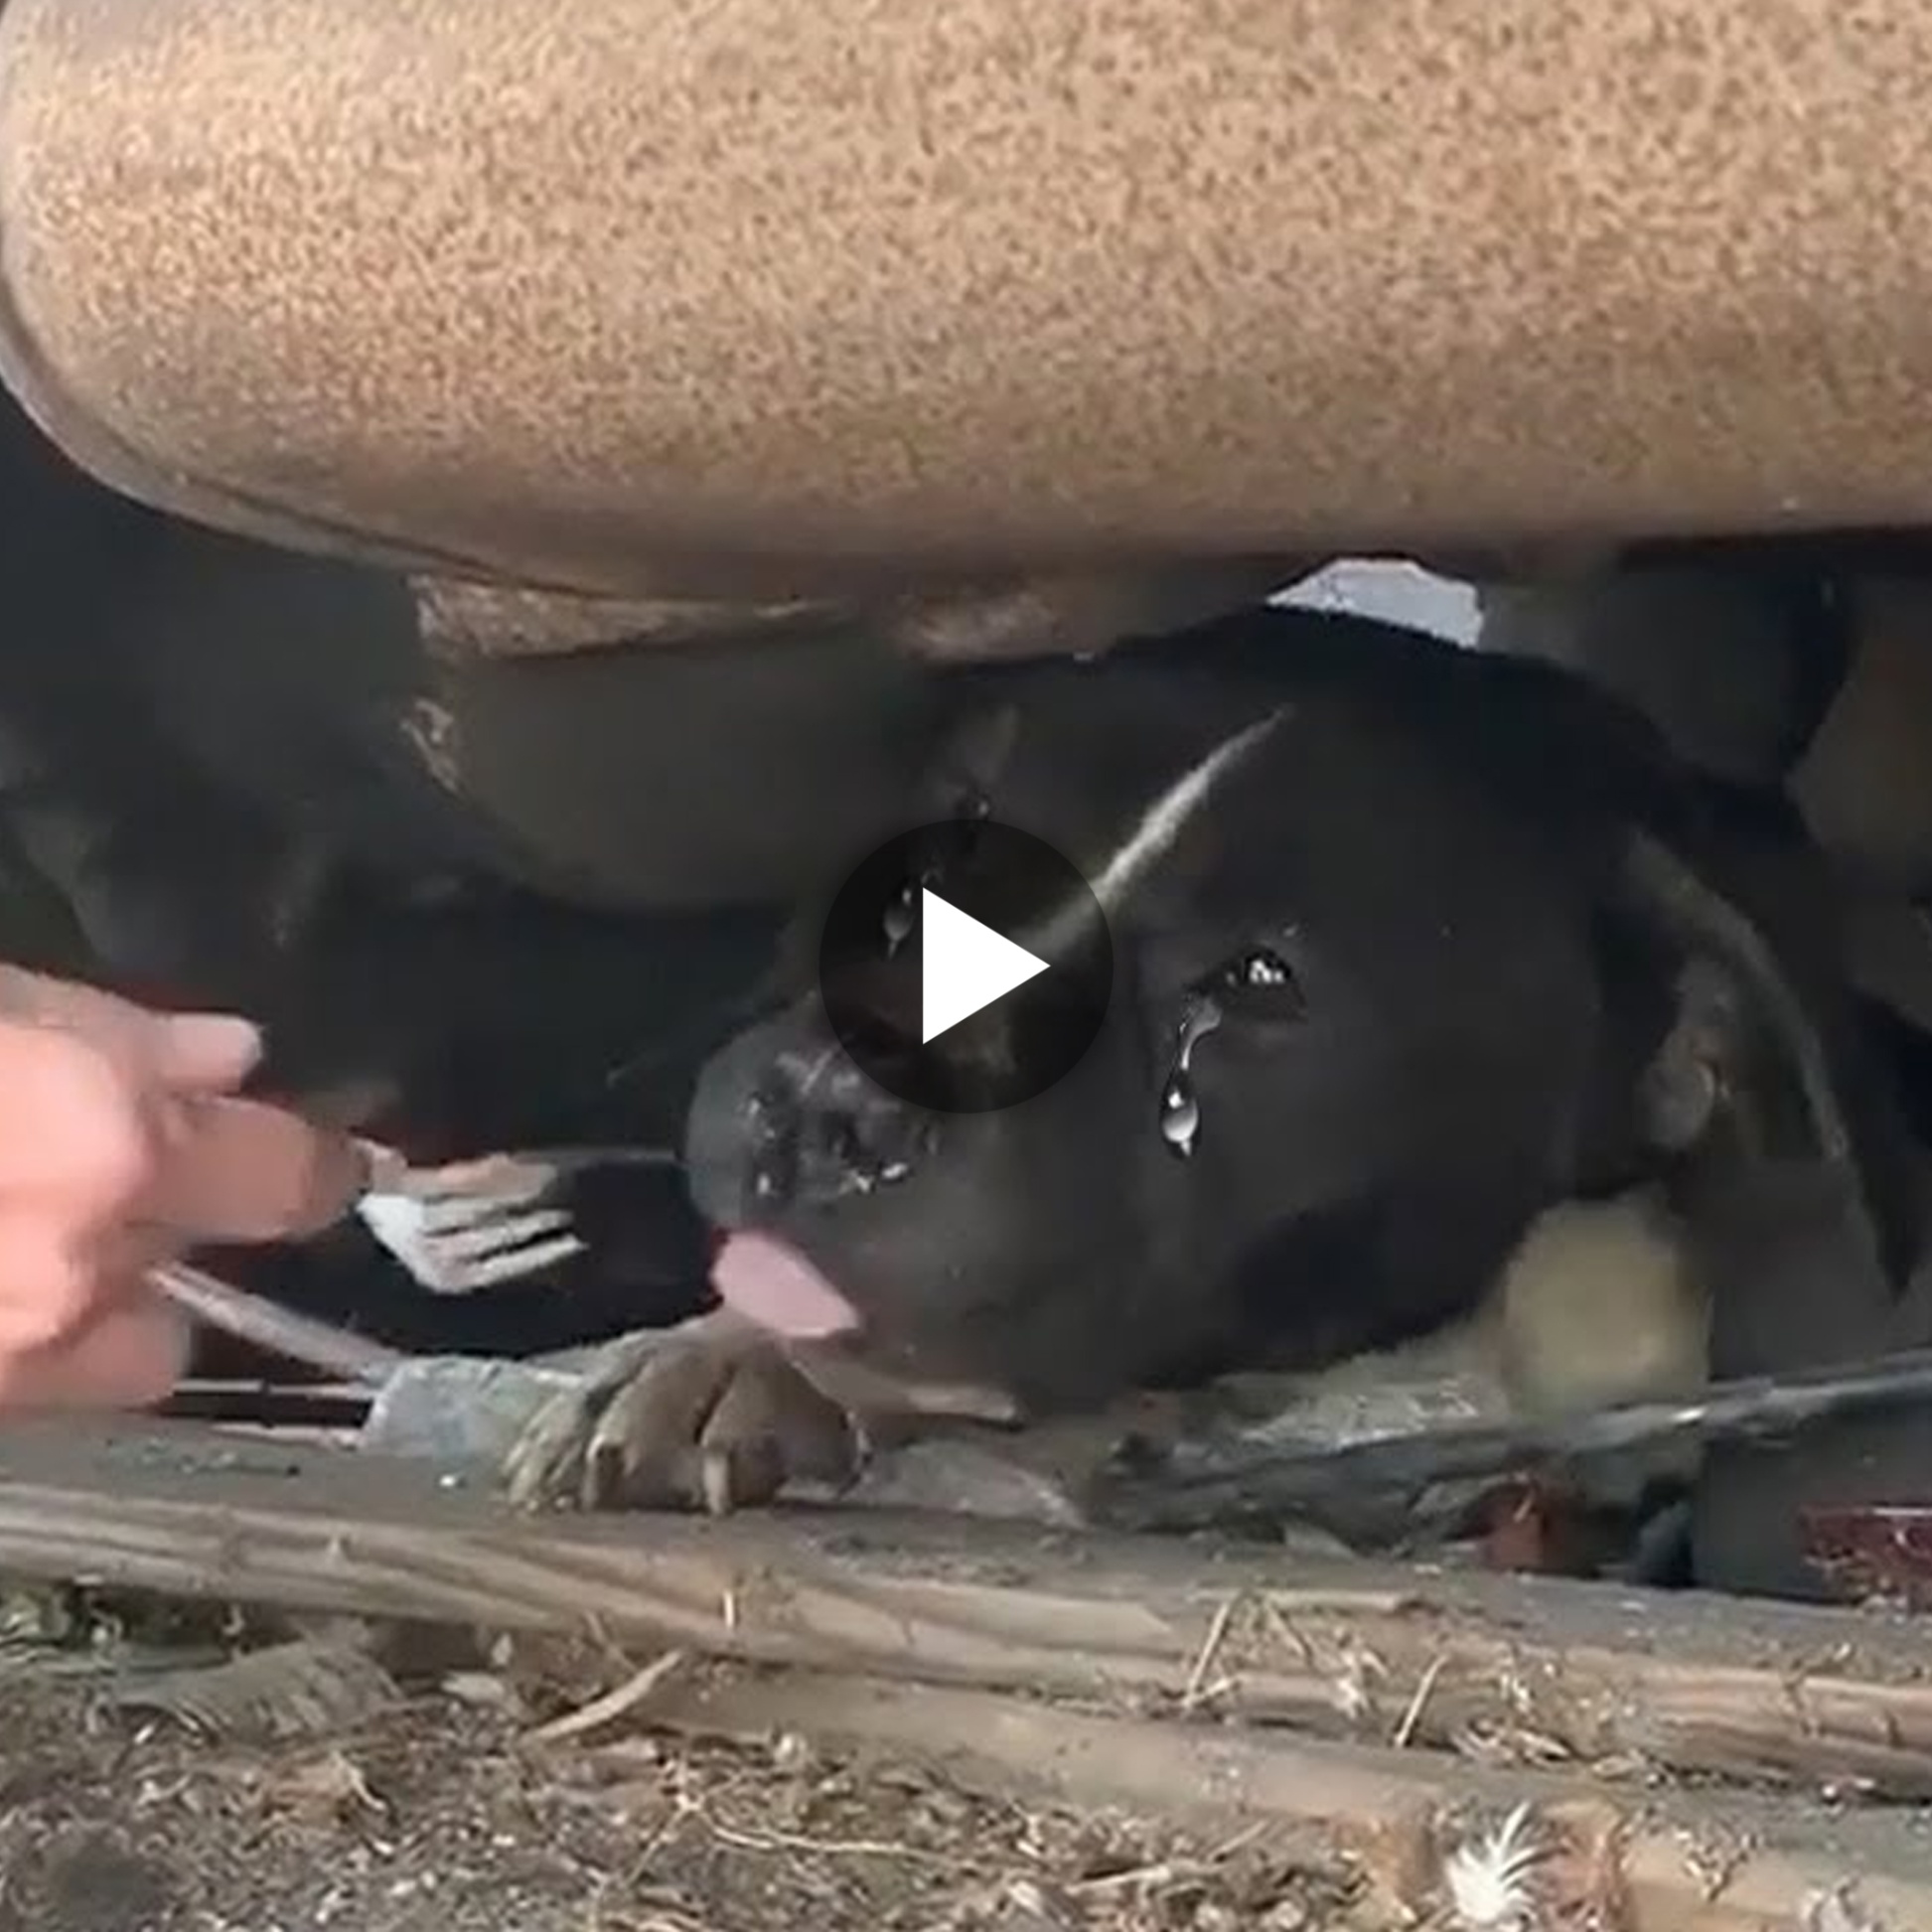 “Incredible Woman Persuades Pregnant Dog to Crawl Under Truck for Rescue, Saving the Dog and Her Puppies (VIDEO)”